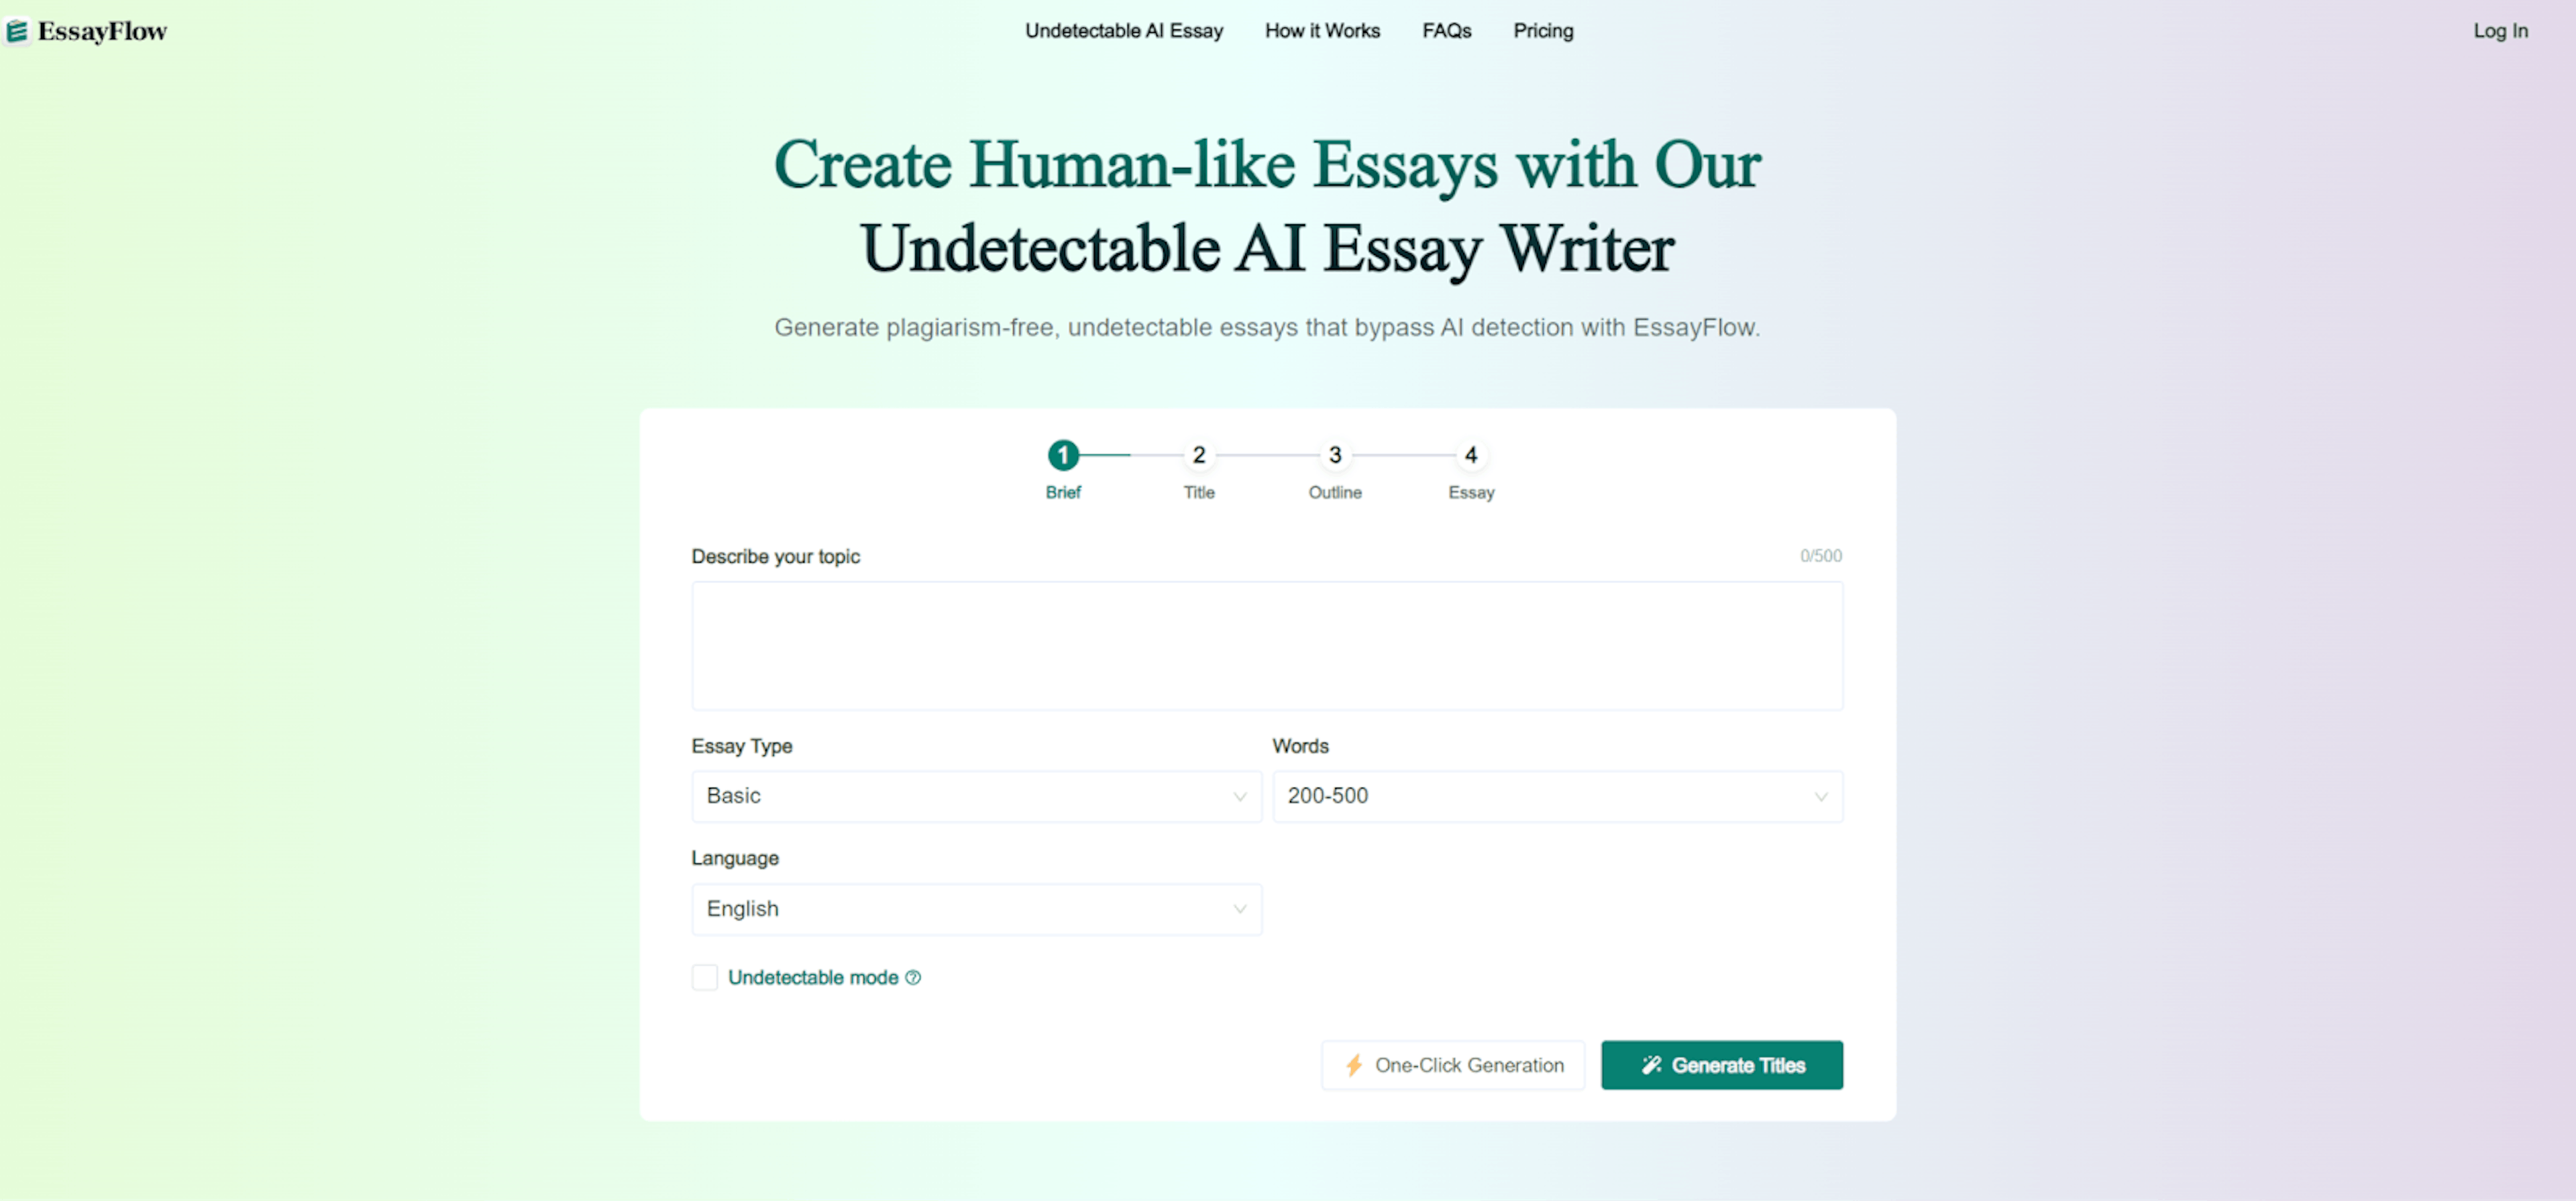 featured image - EssayFlow Review: Setting the Standard for Undetectable AI Essay Writing